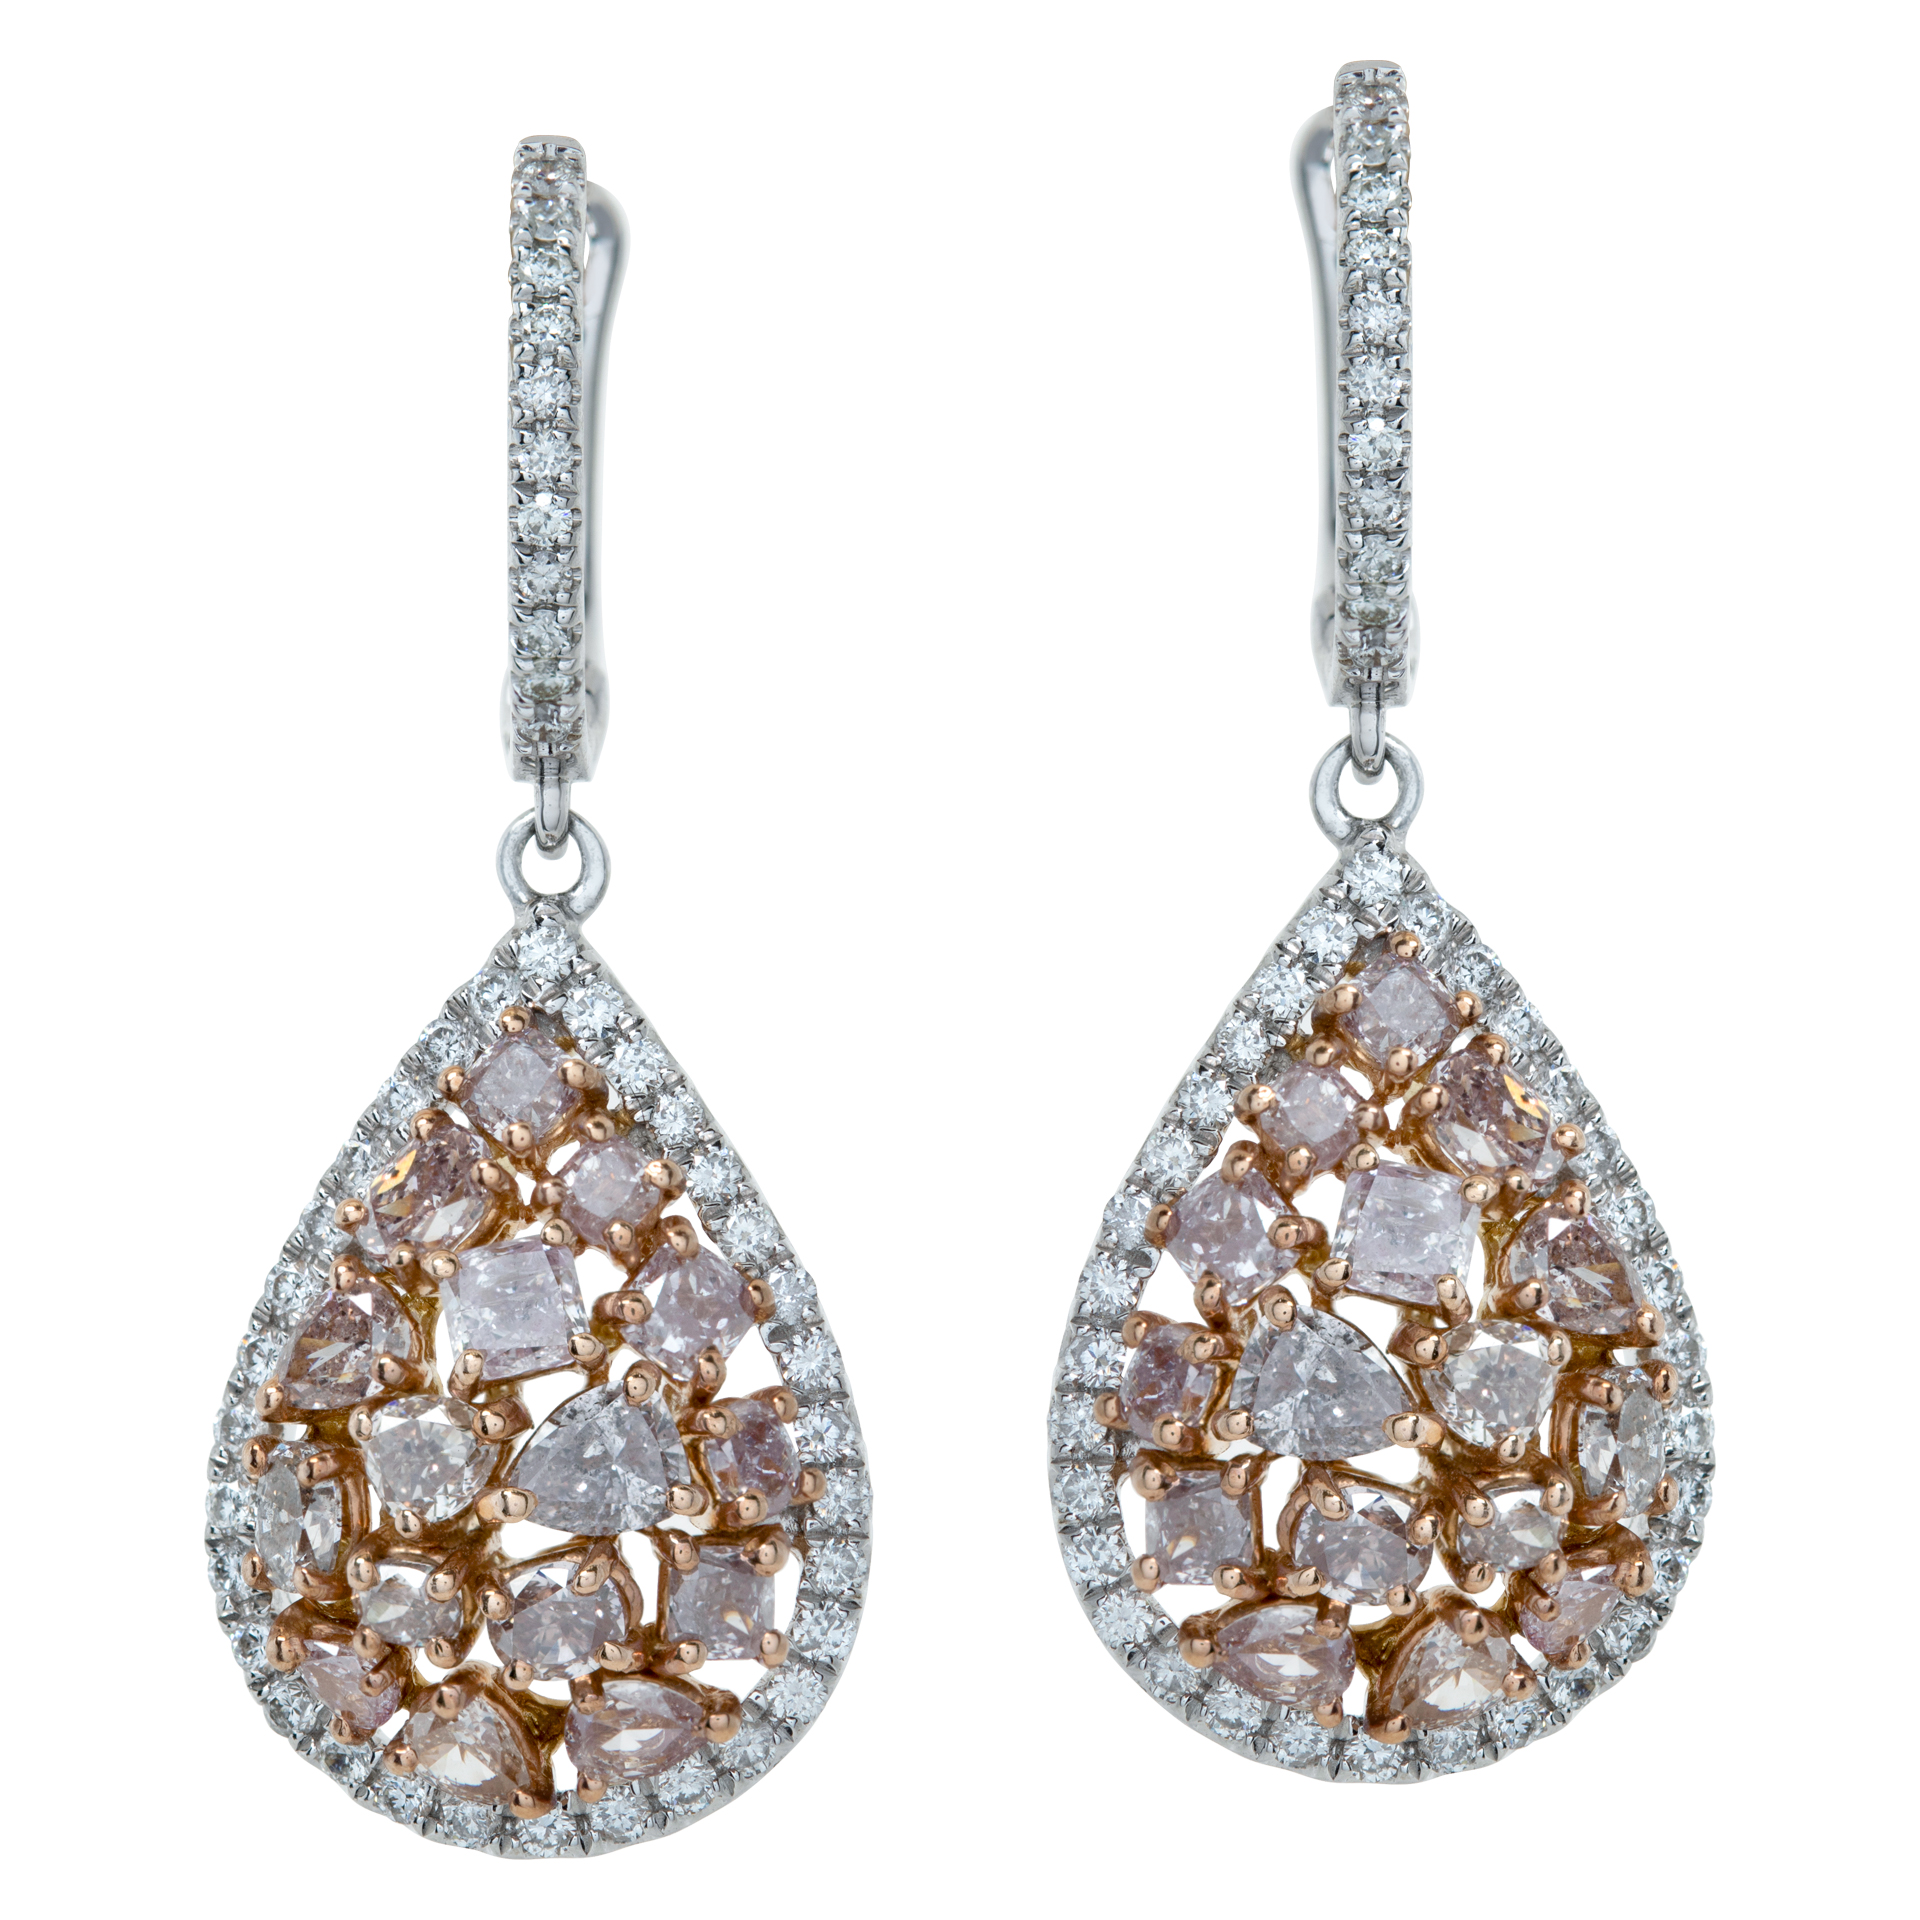 Small Teardrop shaped dangle earrings in 18k with 2.72 cts in Pink Natural Diamonds (Stones)